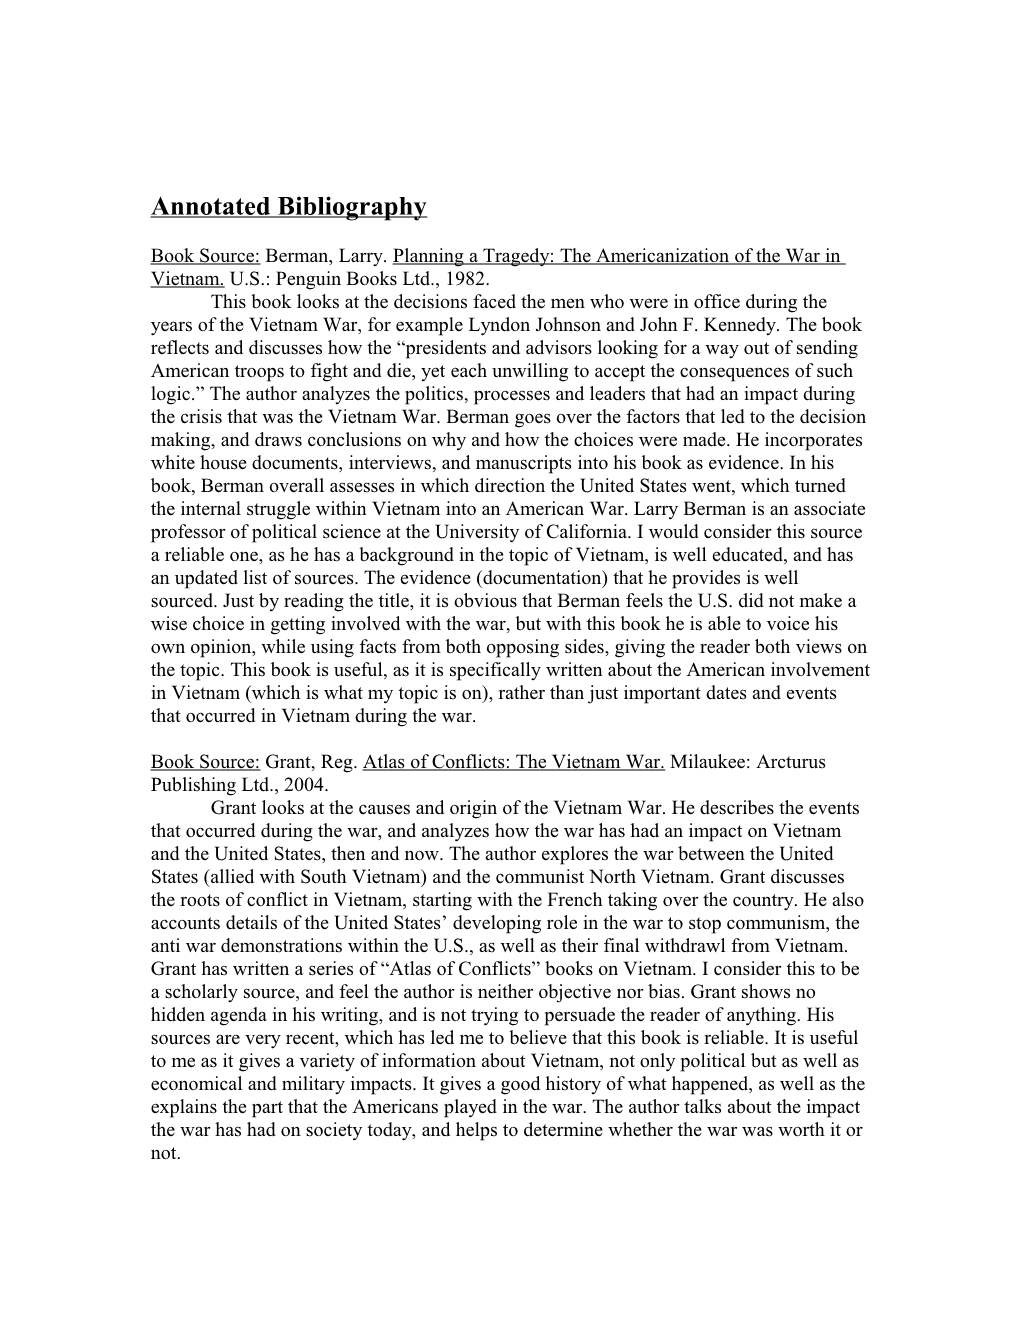 Annotated Bibliography s6